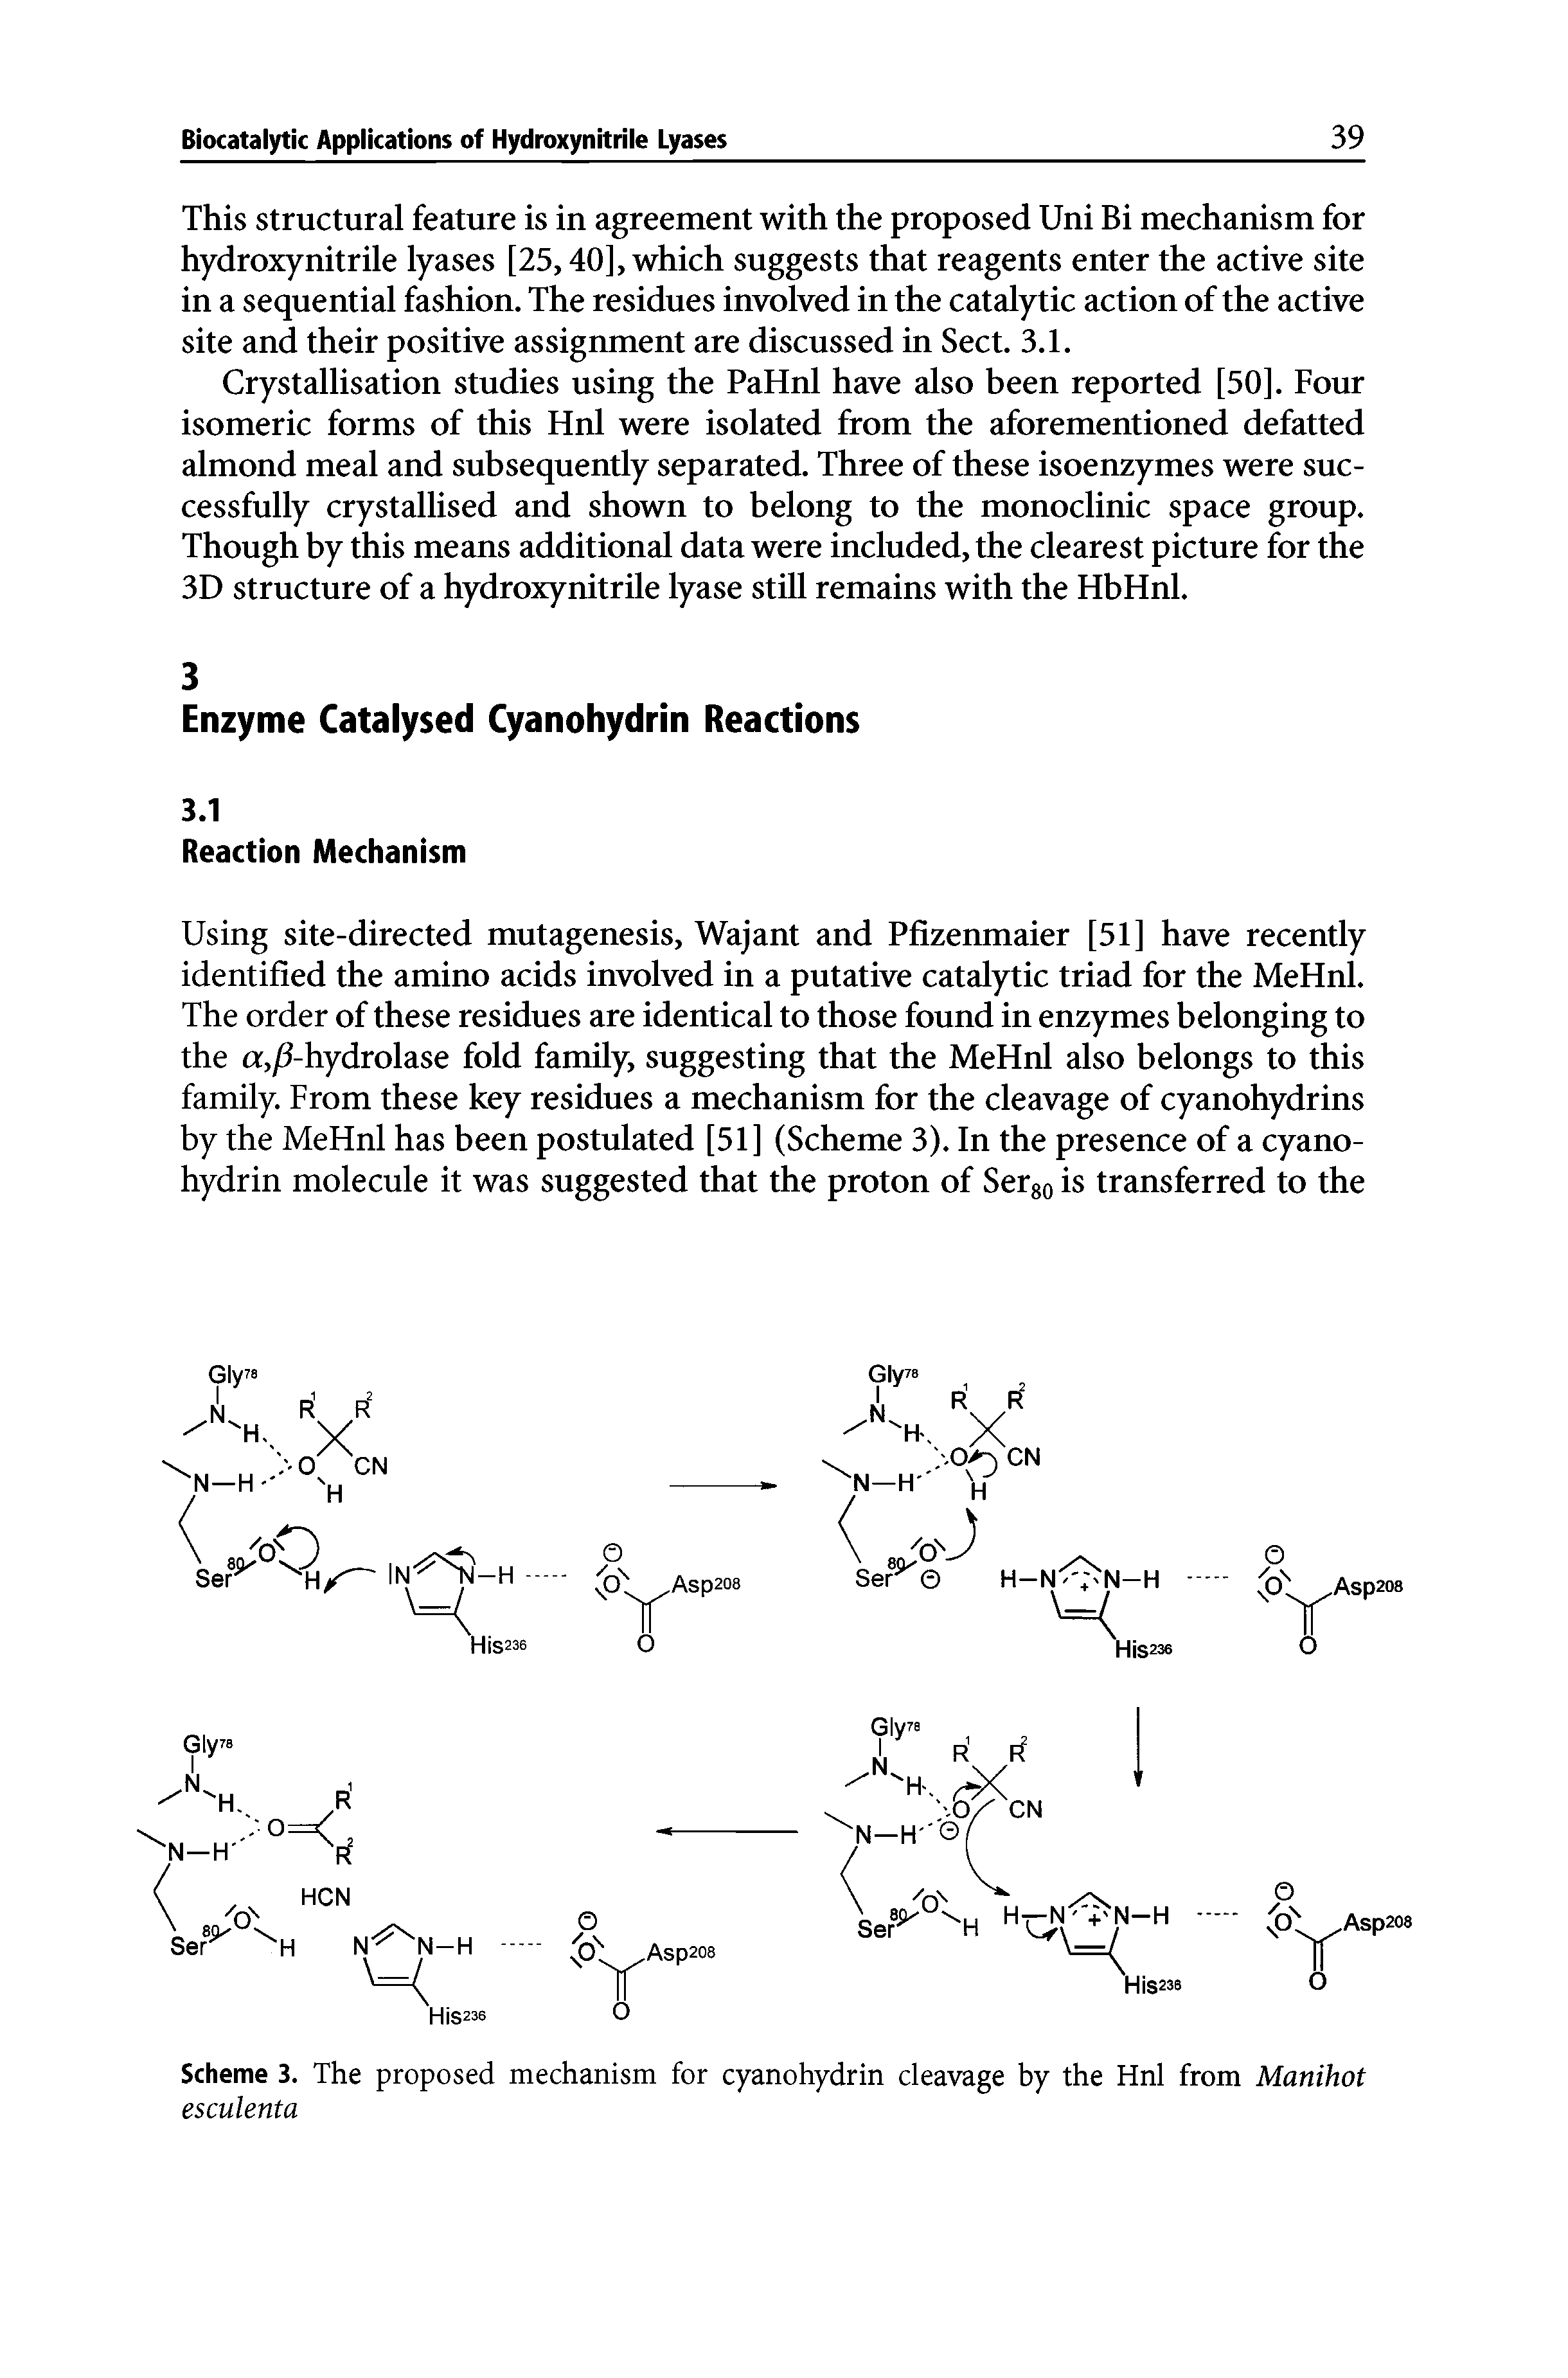 Scheme 3. The proposed mechanism for cyanohydrin cleavage by the Hnl from Manihot...